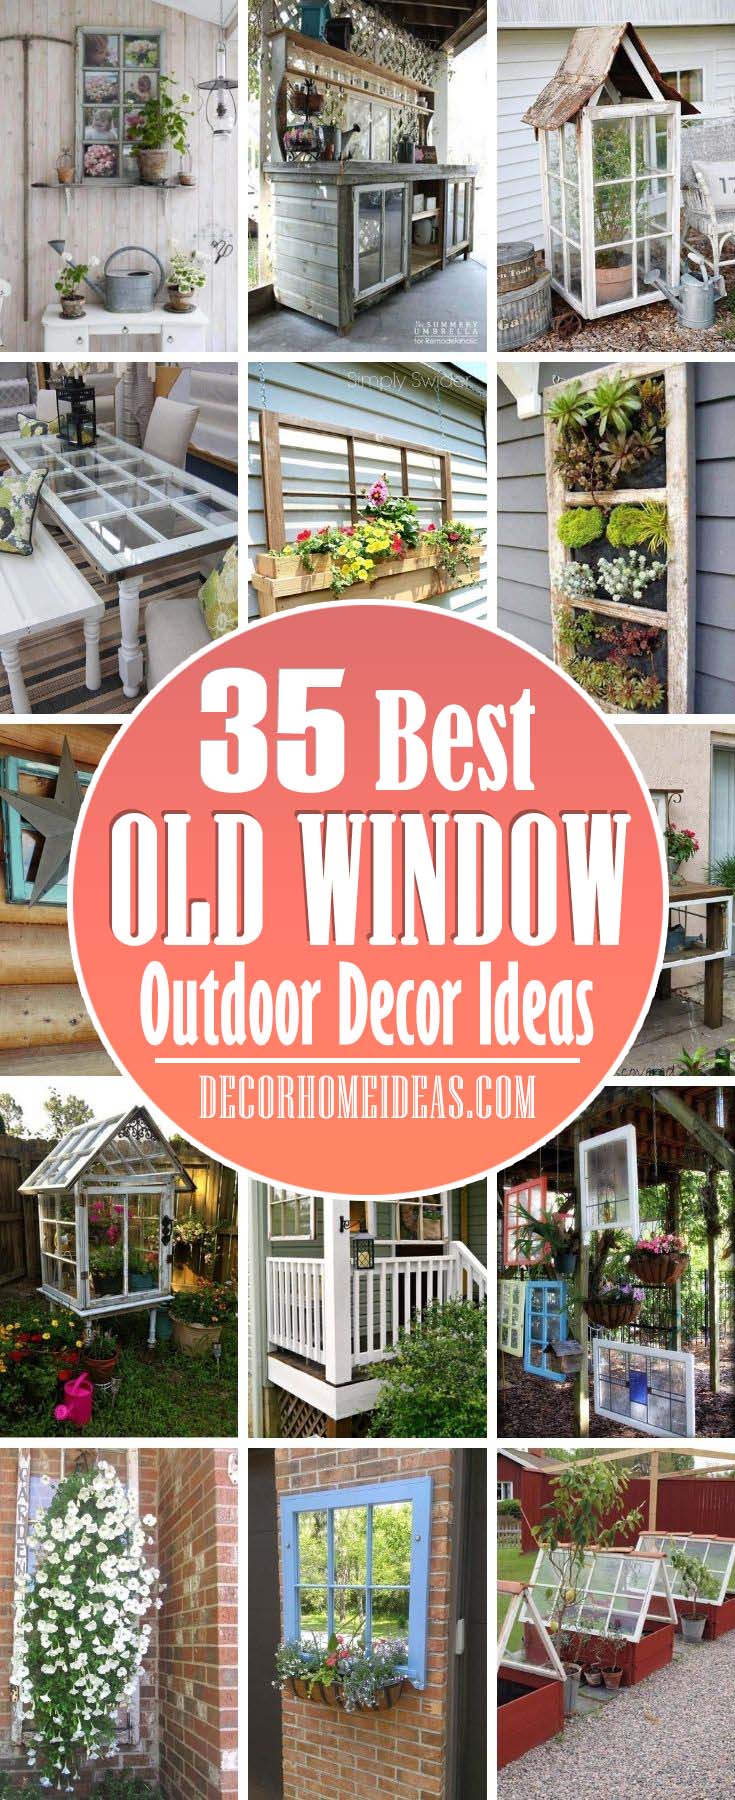 Best Old Window Outdoor Decor Ideas. There are many creative ways to use an old window in your outdoor décor and we have tons of amazing ideas that are easy to recreate. Get some inspiration and repurpose your old windows. #decorhomeideas